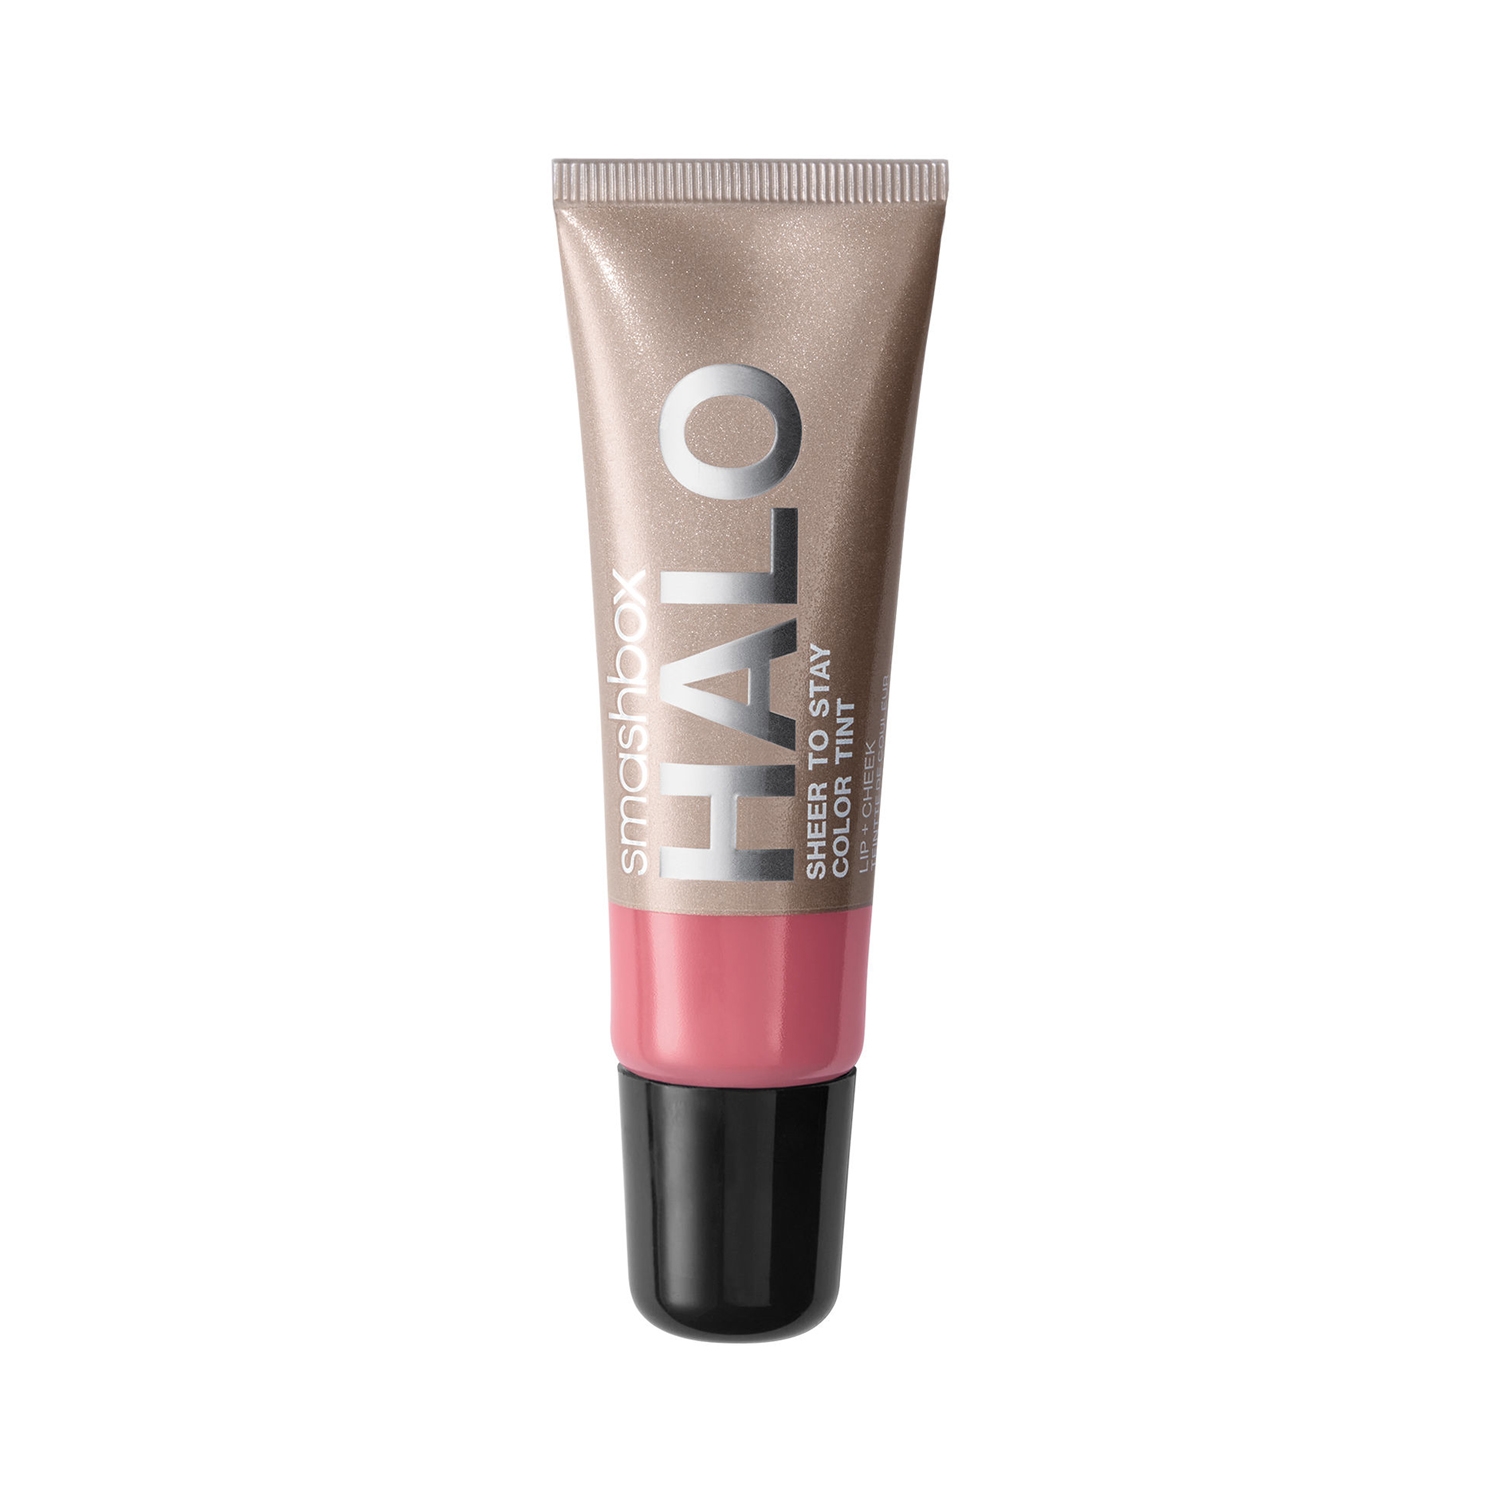 Smashbox Halo Sheer To Stay Color Tint - Wisteria (10ml)